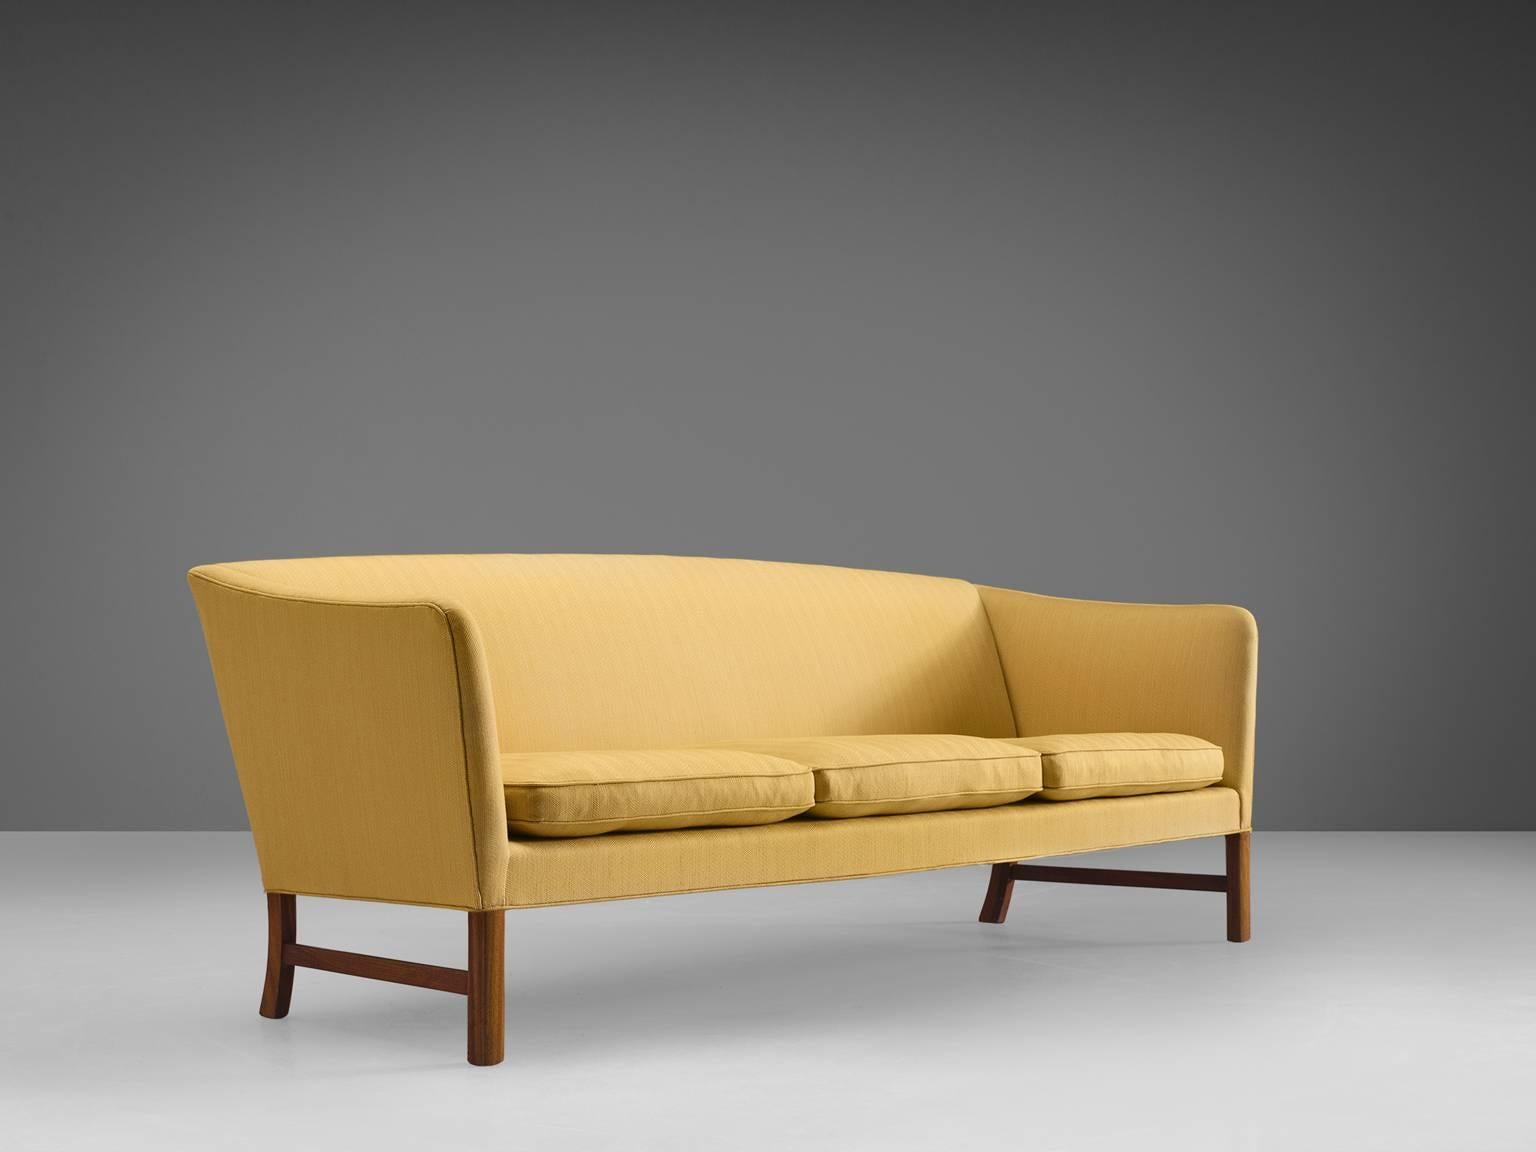 Ole Wanscher for A.J. Iversen, three-seat sofa in mahogany and yellow fabric, Denmark, 1950s. 

This sofa is designed by Ole Wanscher for A.J. Iversen. This sofa shows typical Danish design traits such as exquisite craftsmanship and modest